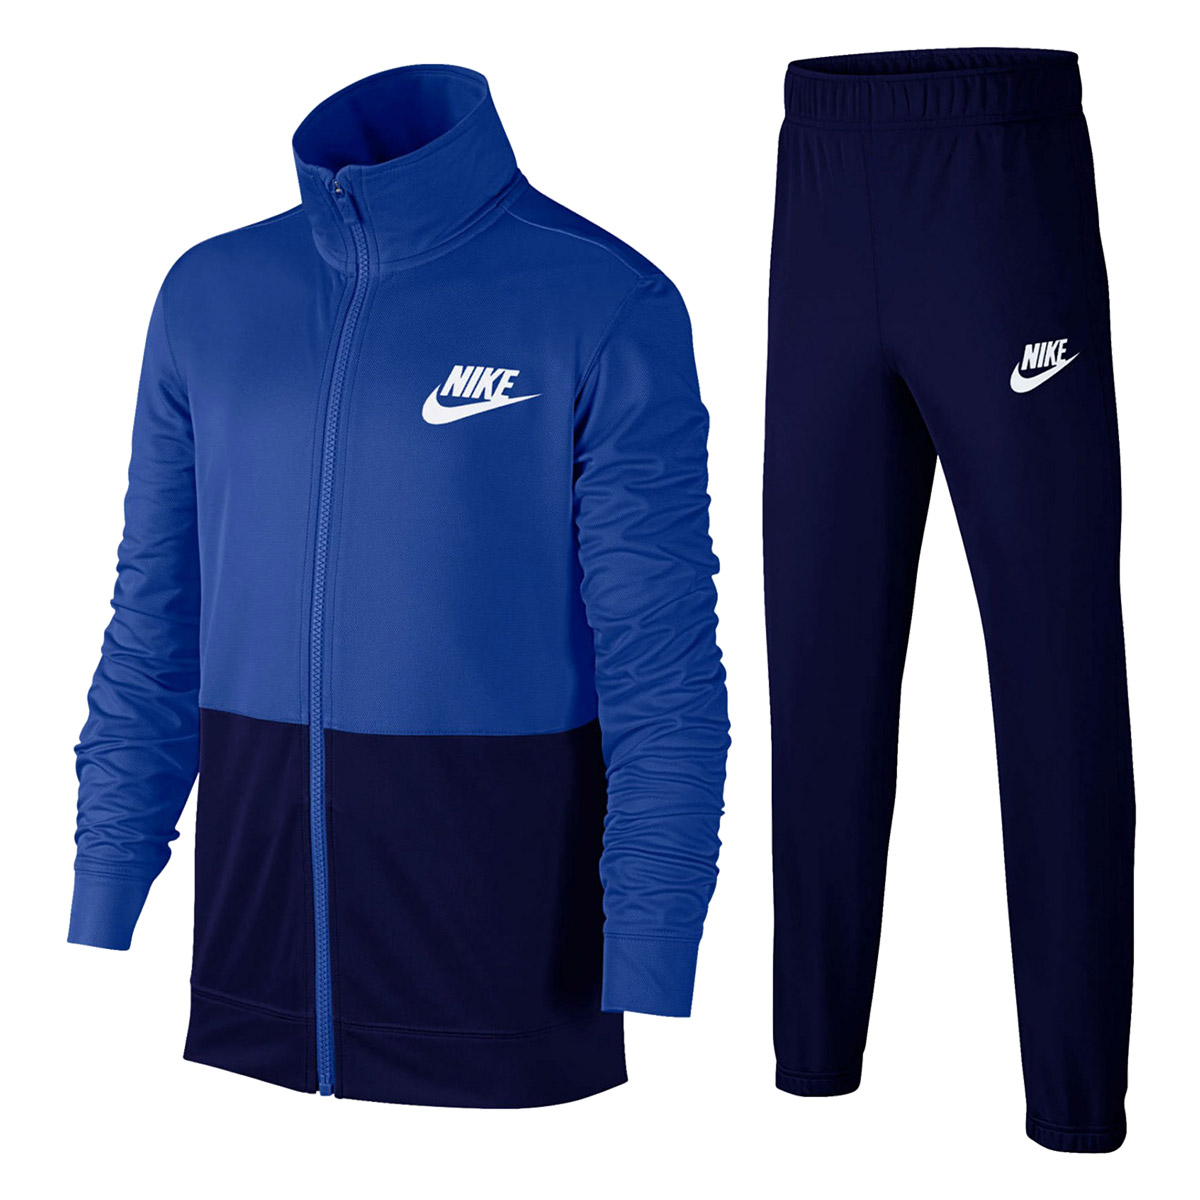 Nike B NSW TRACK SUIT POLY 